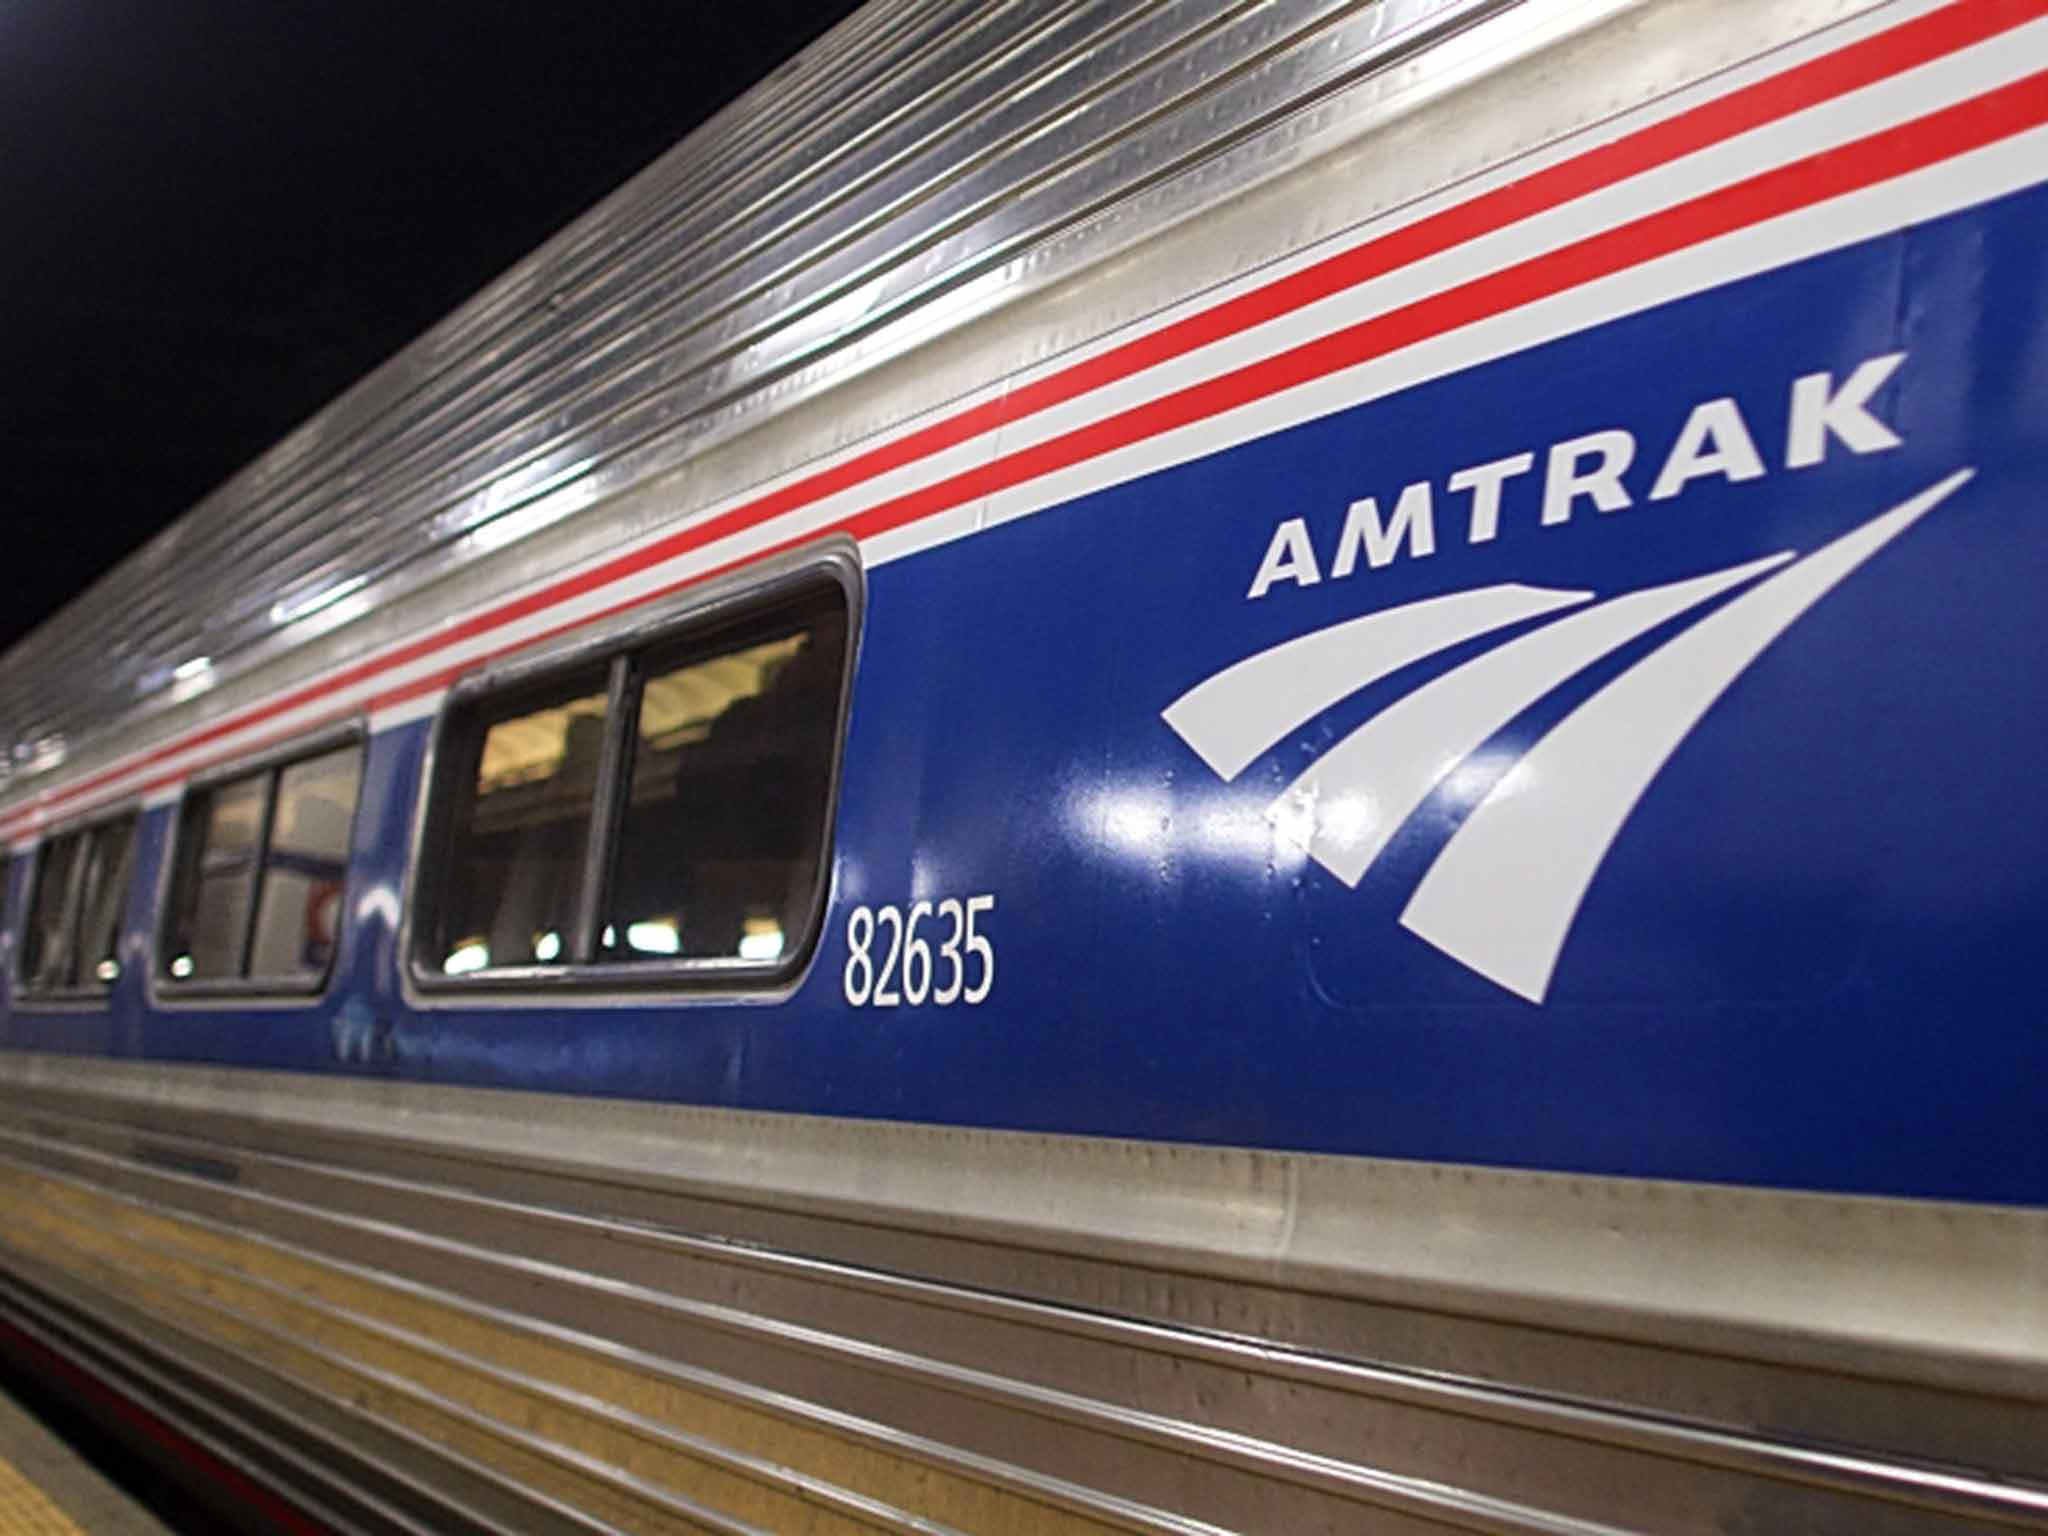 Under Donald Trump's proposed budget Amtrak would lose all federal funding, eliminating passenger rail service to over 200 rural communities